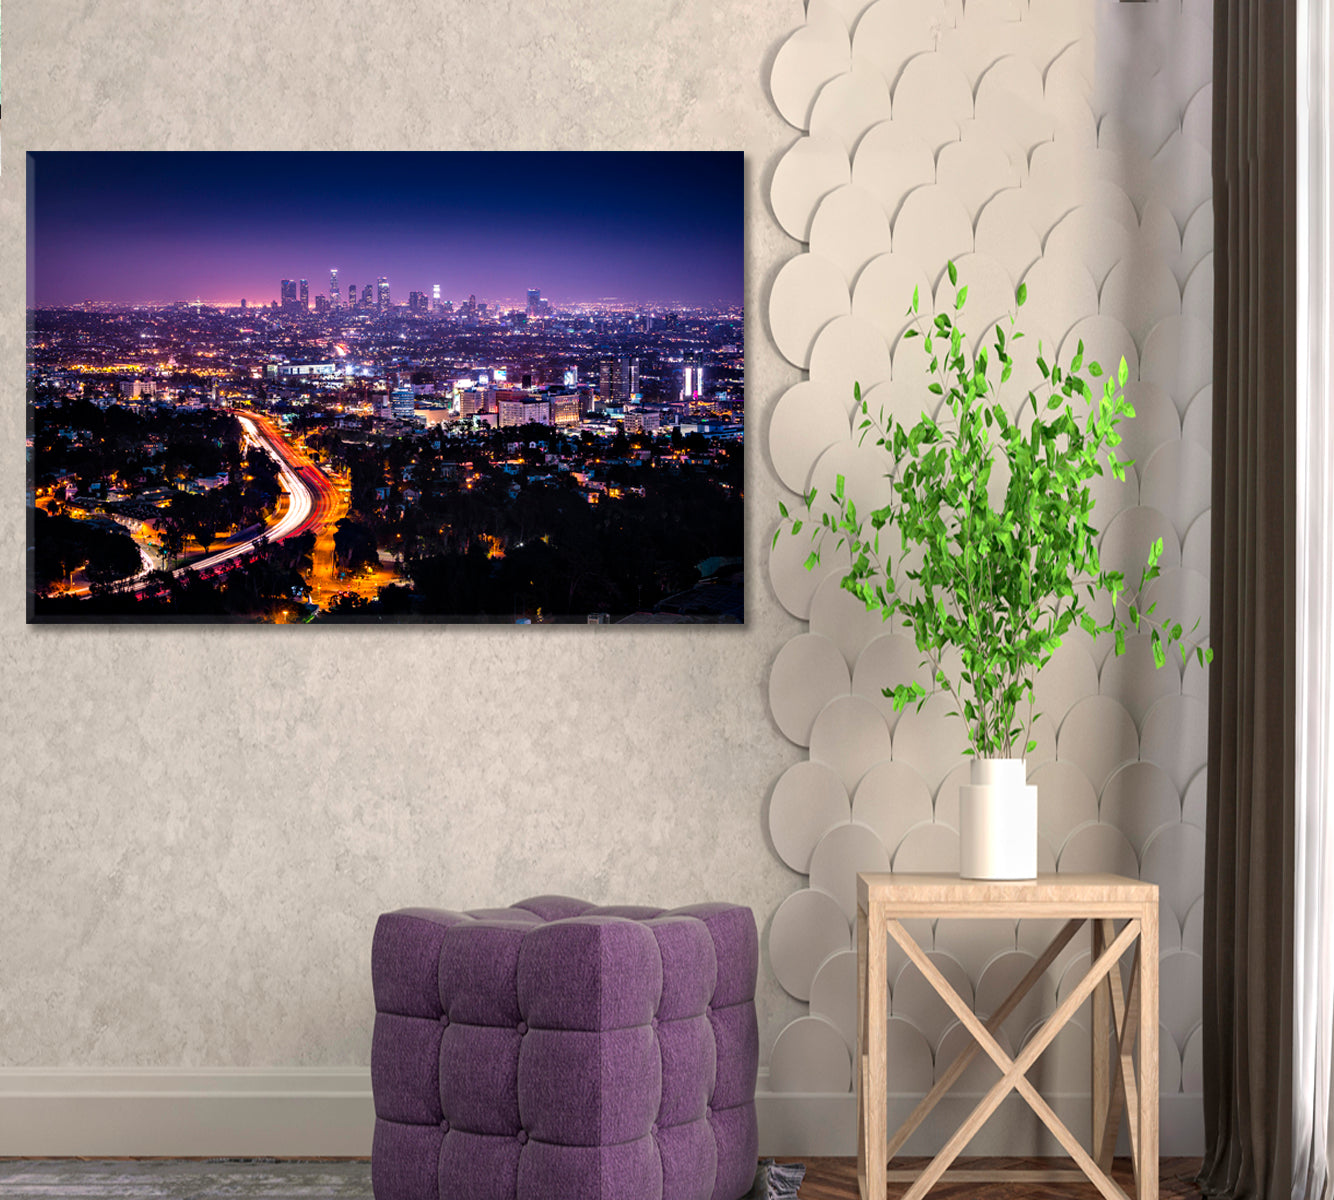 Los Angeles Skyline at Night Canvas Print ArtLexy 1 Panel 24"x16" inches 